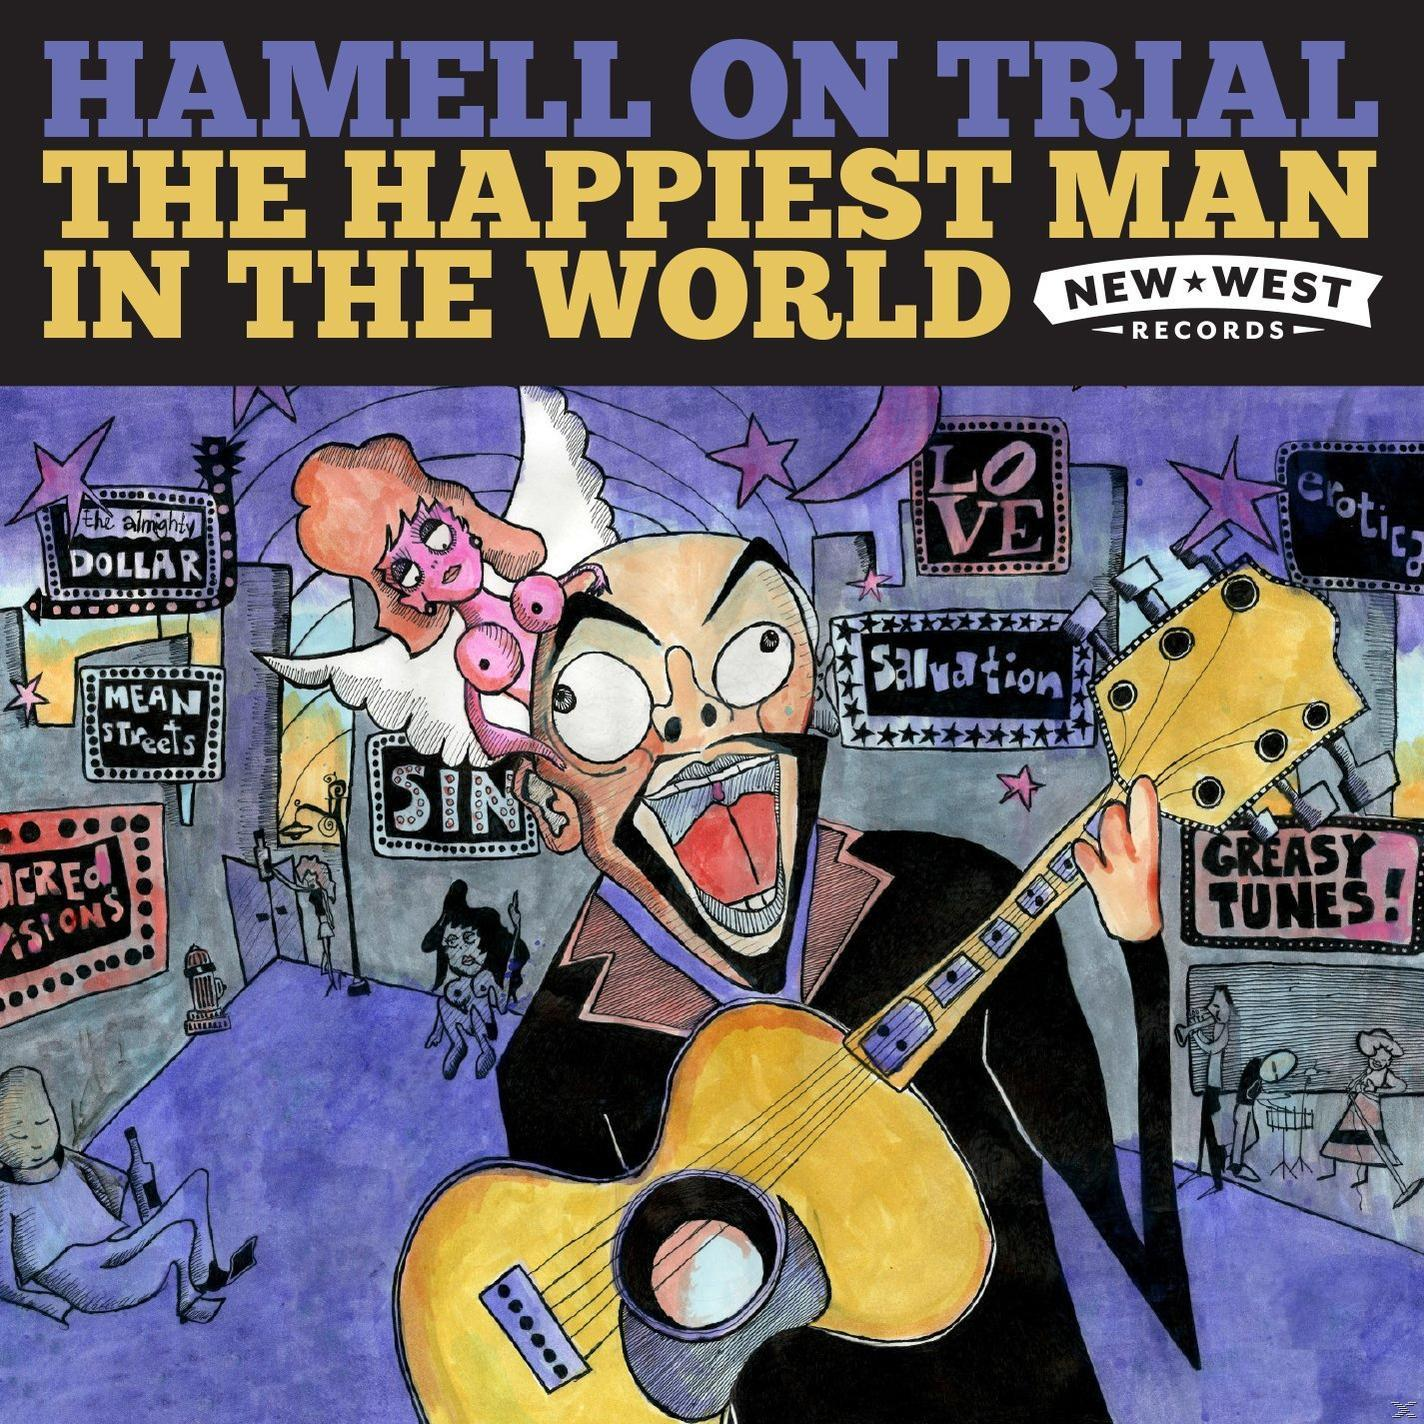 On Happiest Man - In Hamell World Trial (Vinyl) The The -